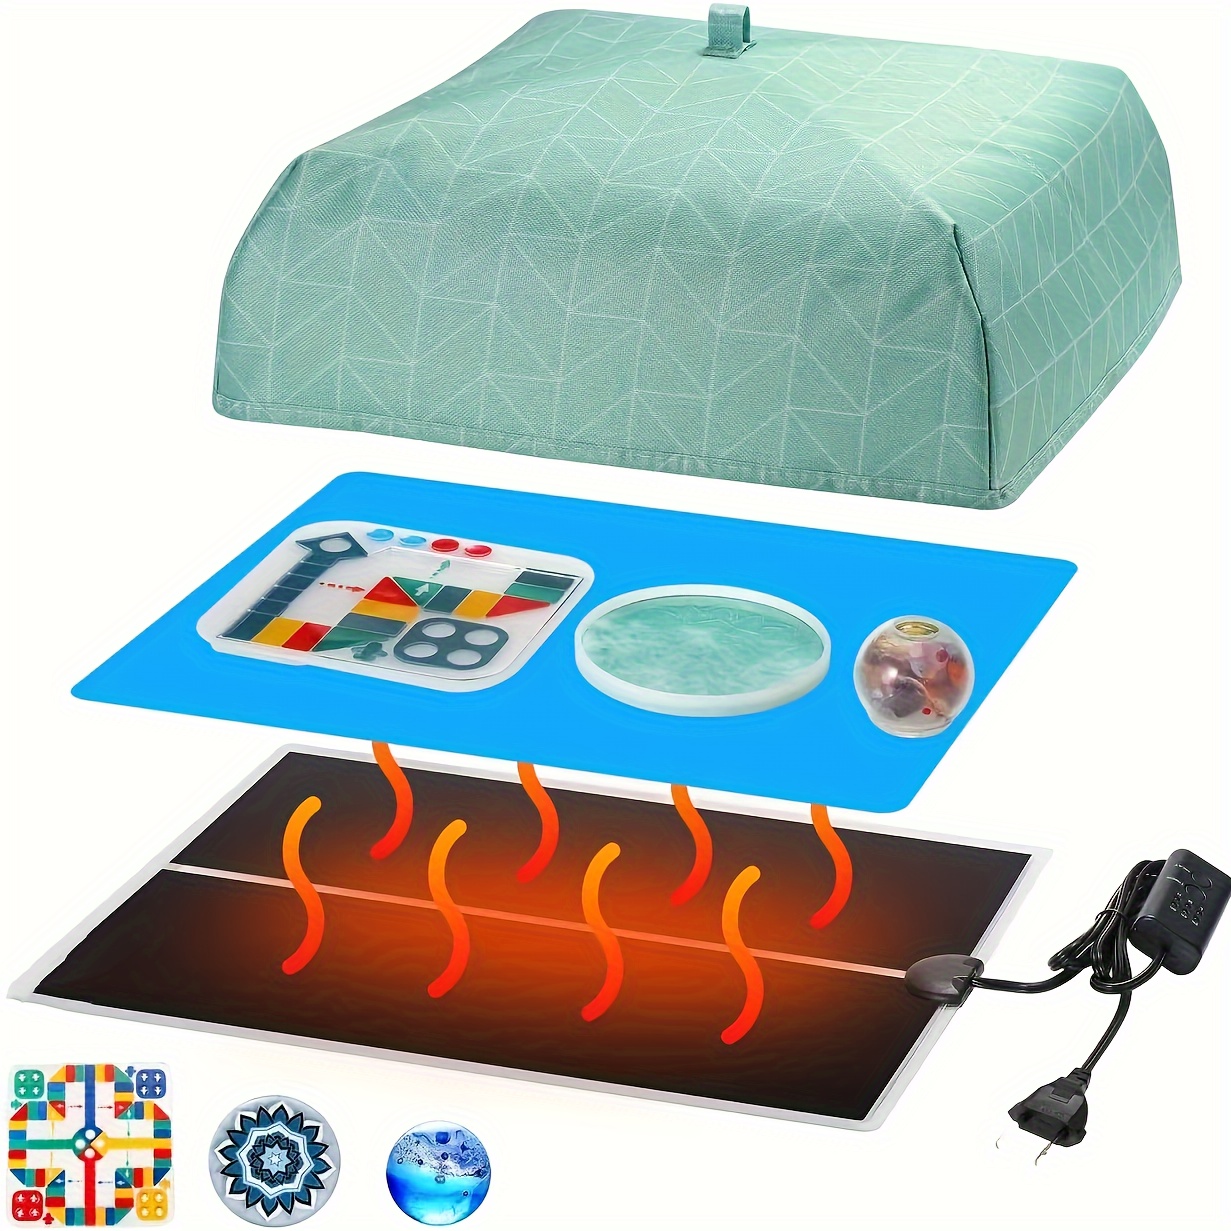 Resin Heating Mat Fast Resin Curing Mat With Timer Cover For Resin Silicone  US Plug - AliExpress